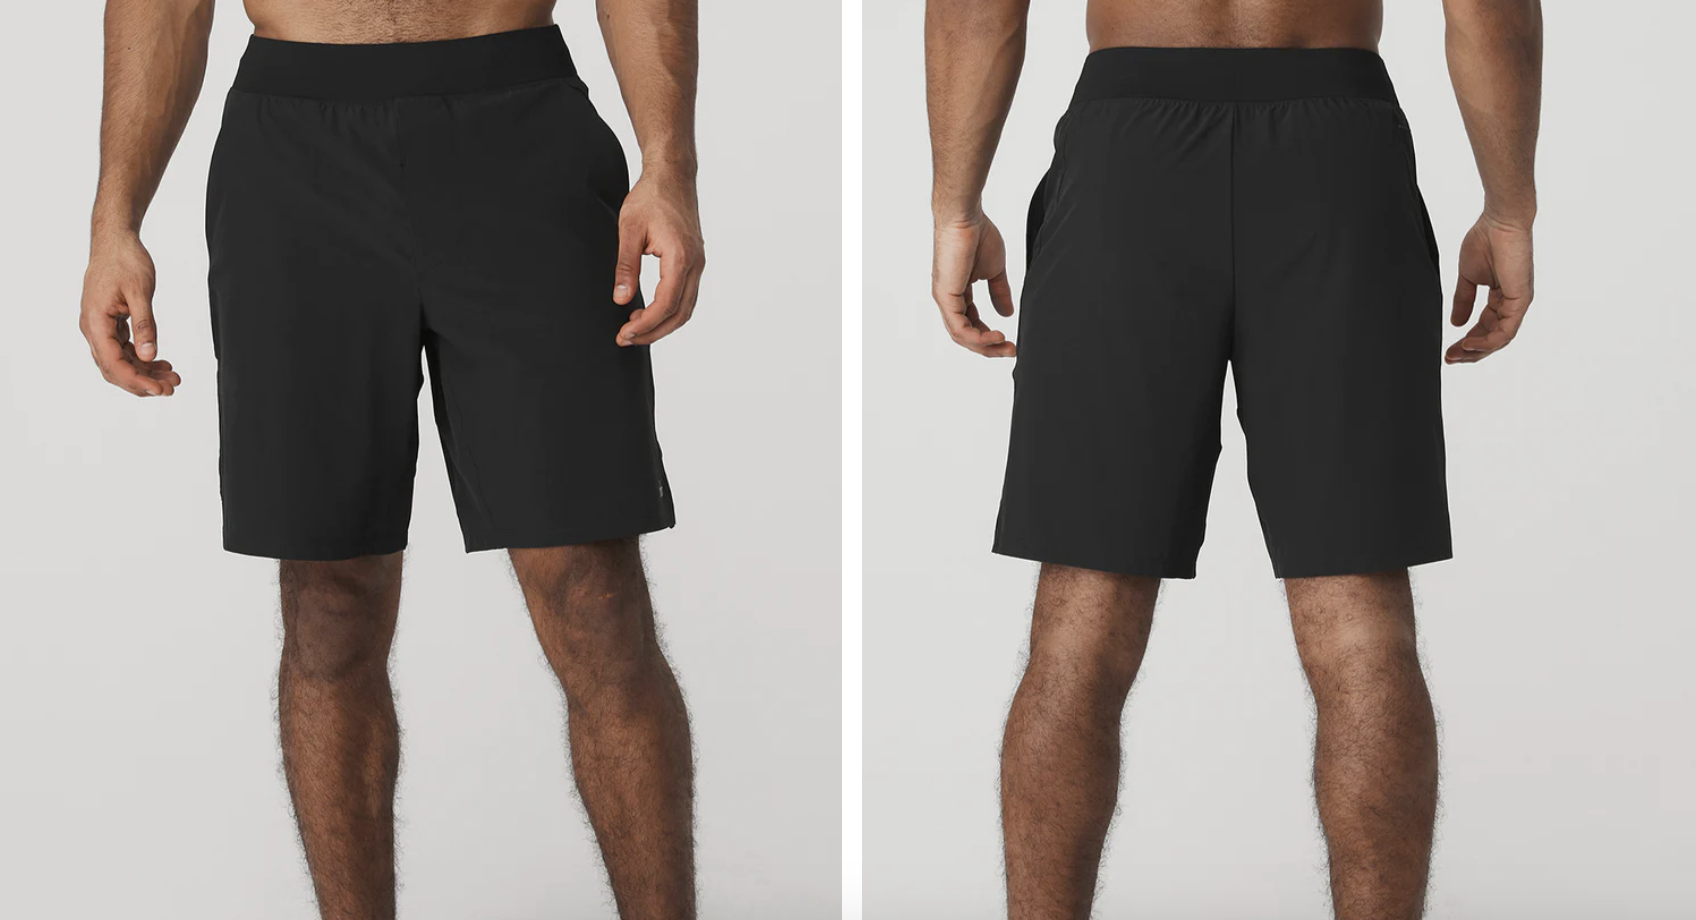 first photo is the front view of a man wearing Alo black shorts, second photo is a man from behind wearing black Alo shorts